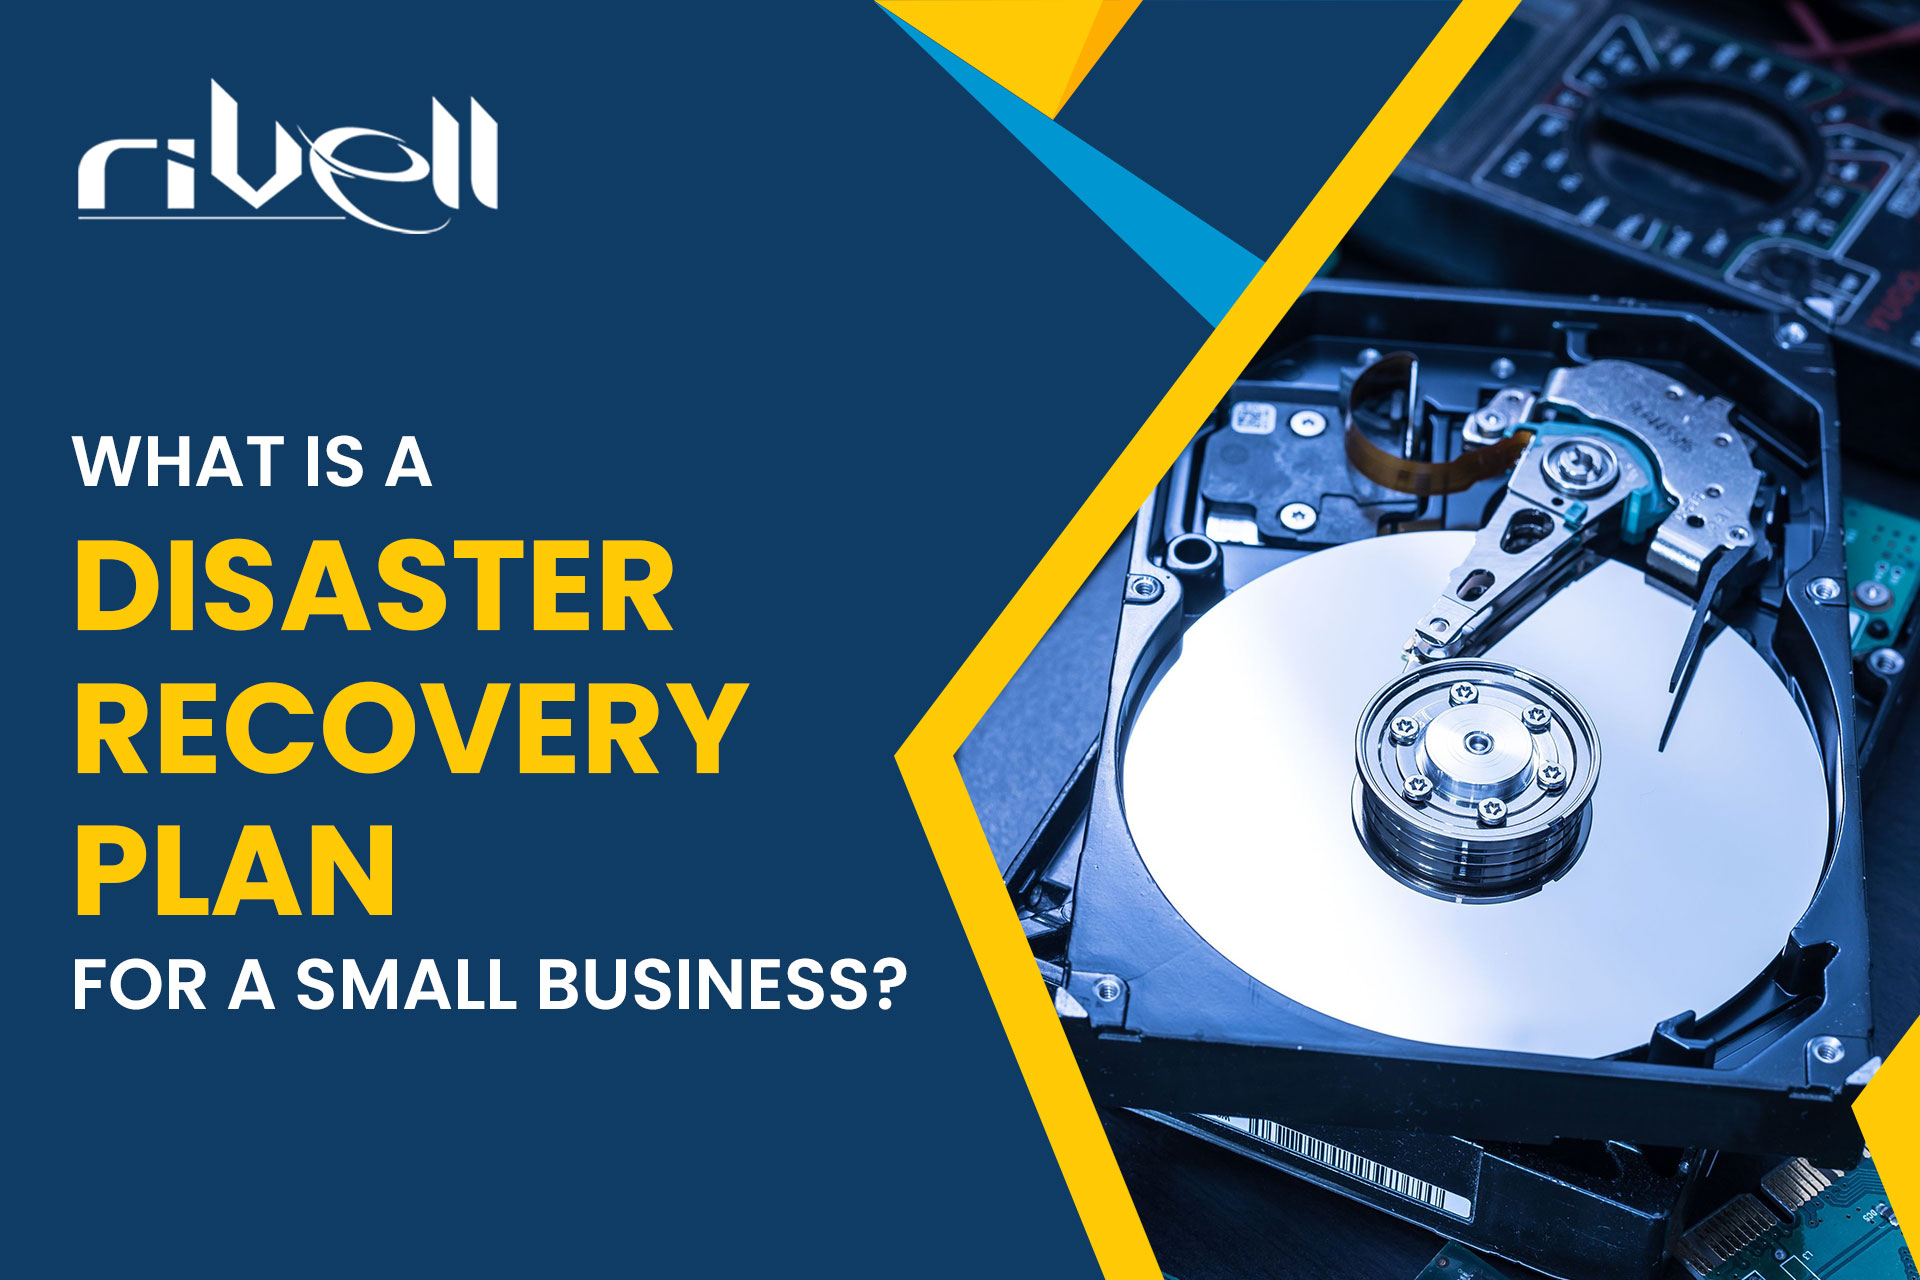 What is a disaster recovery plan for a small business